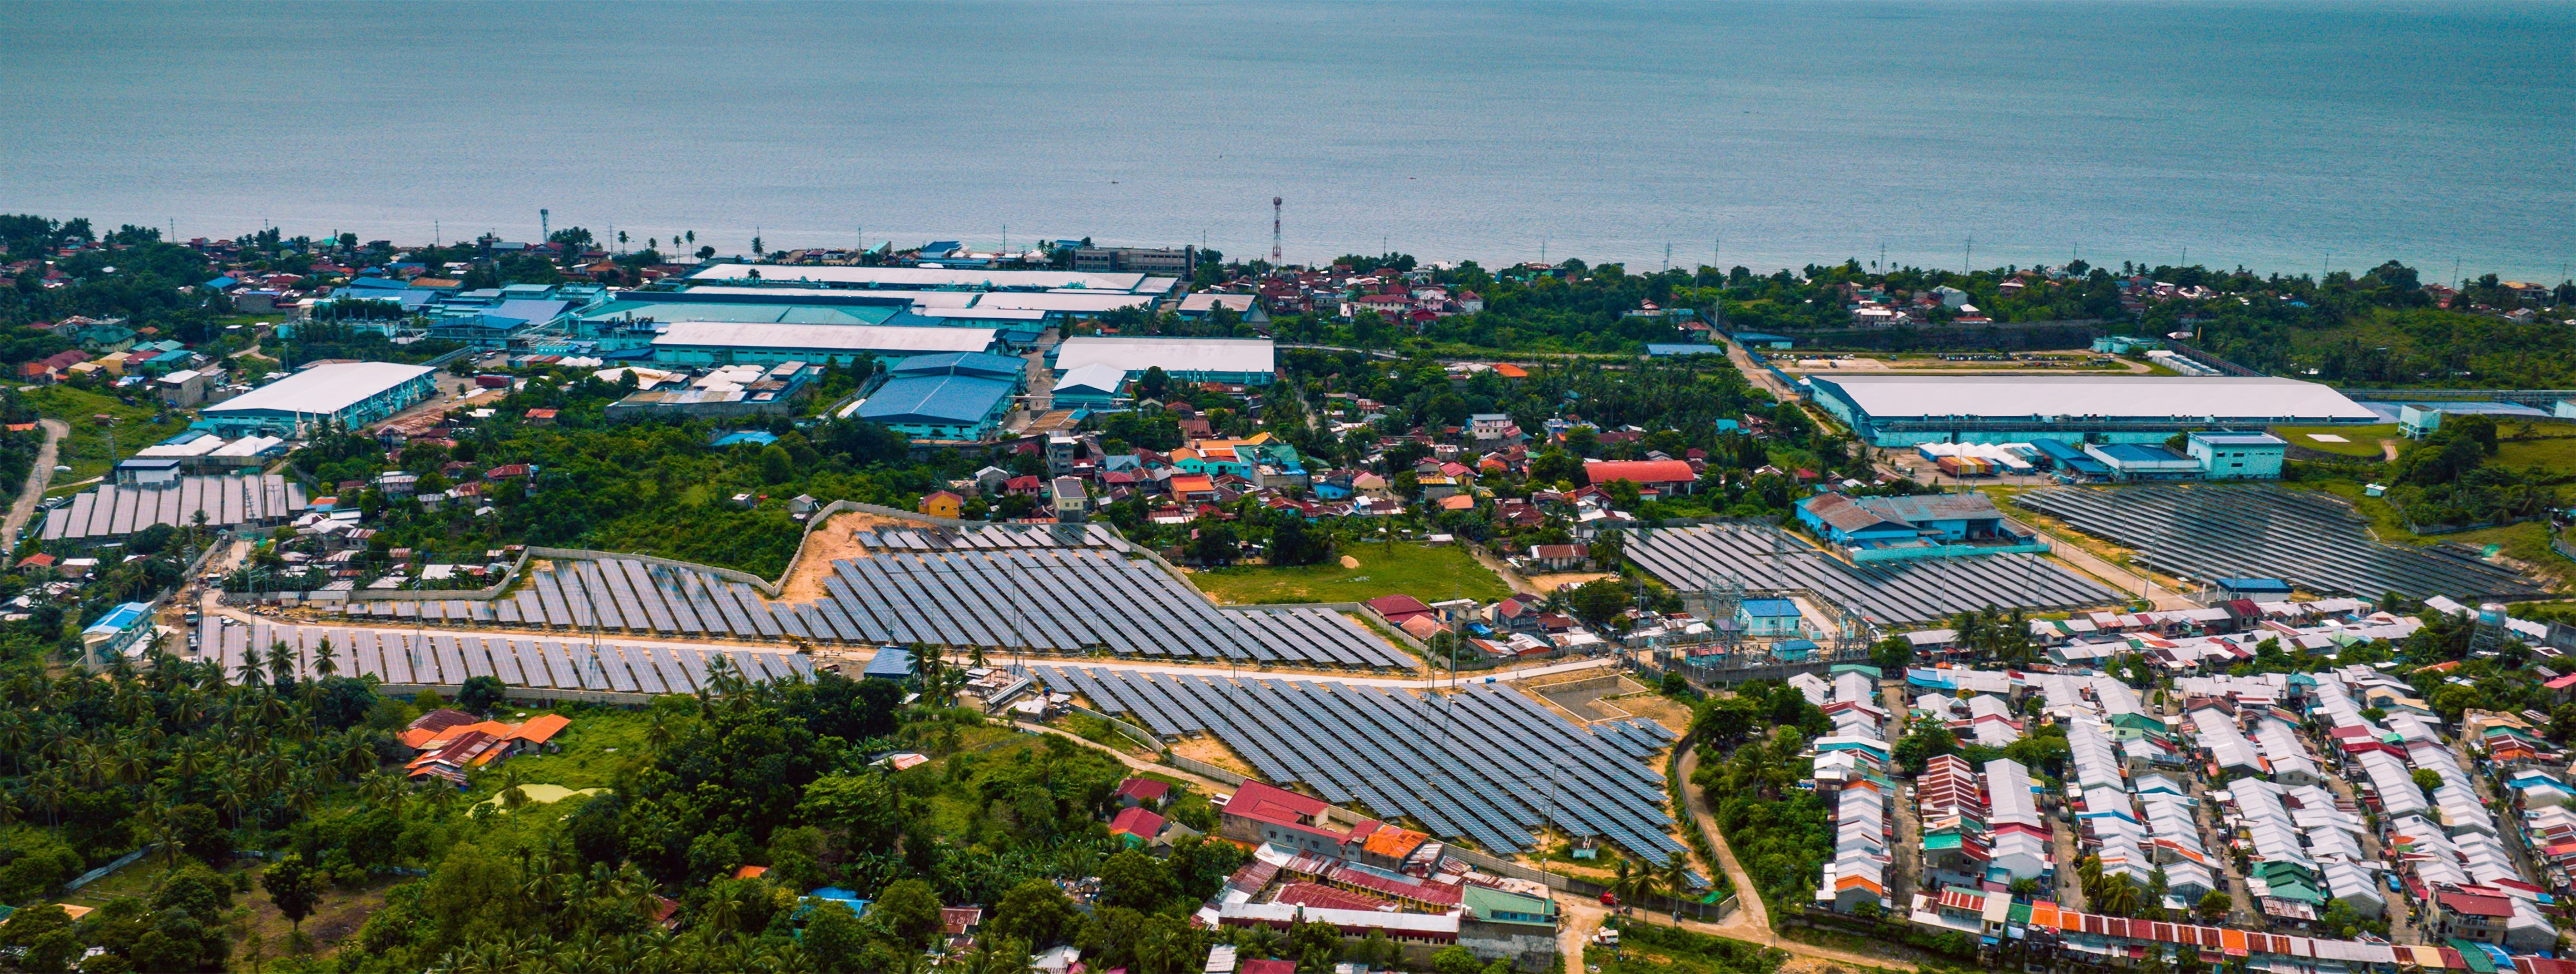 Sharp Installs Self-consumption Solar Power System at MinebeaMitsumi*1 Plant in the Philippines